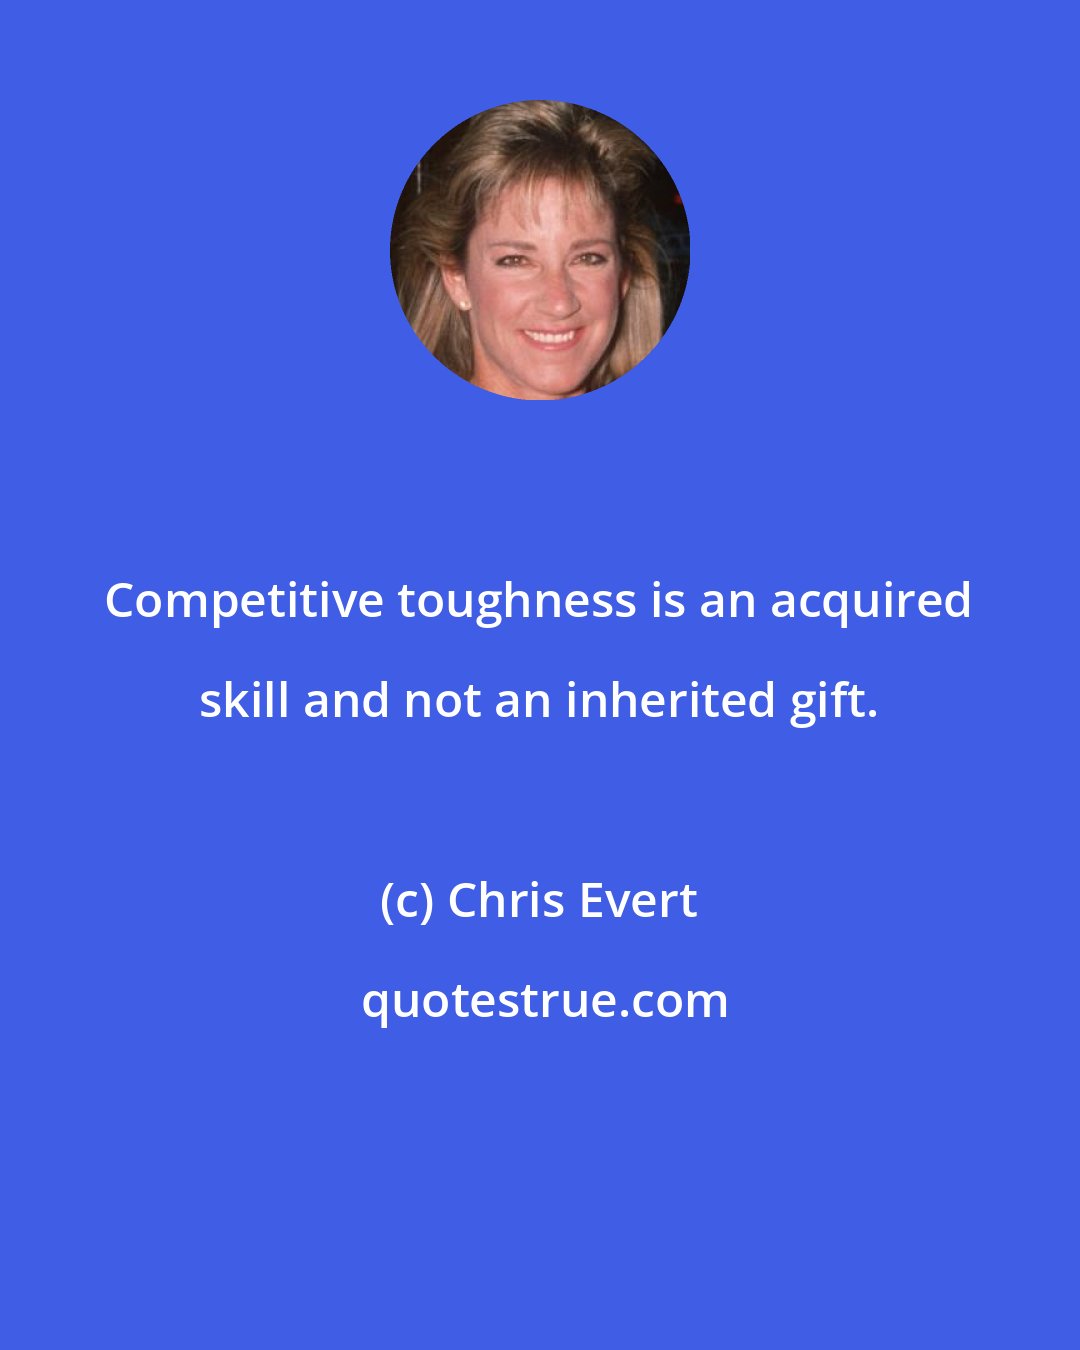 Chris Evert: Competitive toughness is an acquired skill and not an inherited gift.